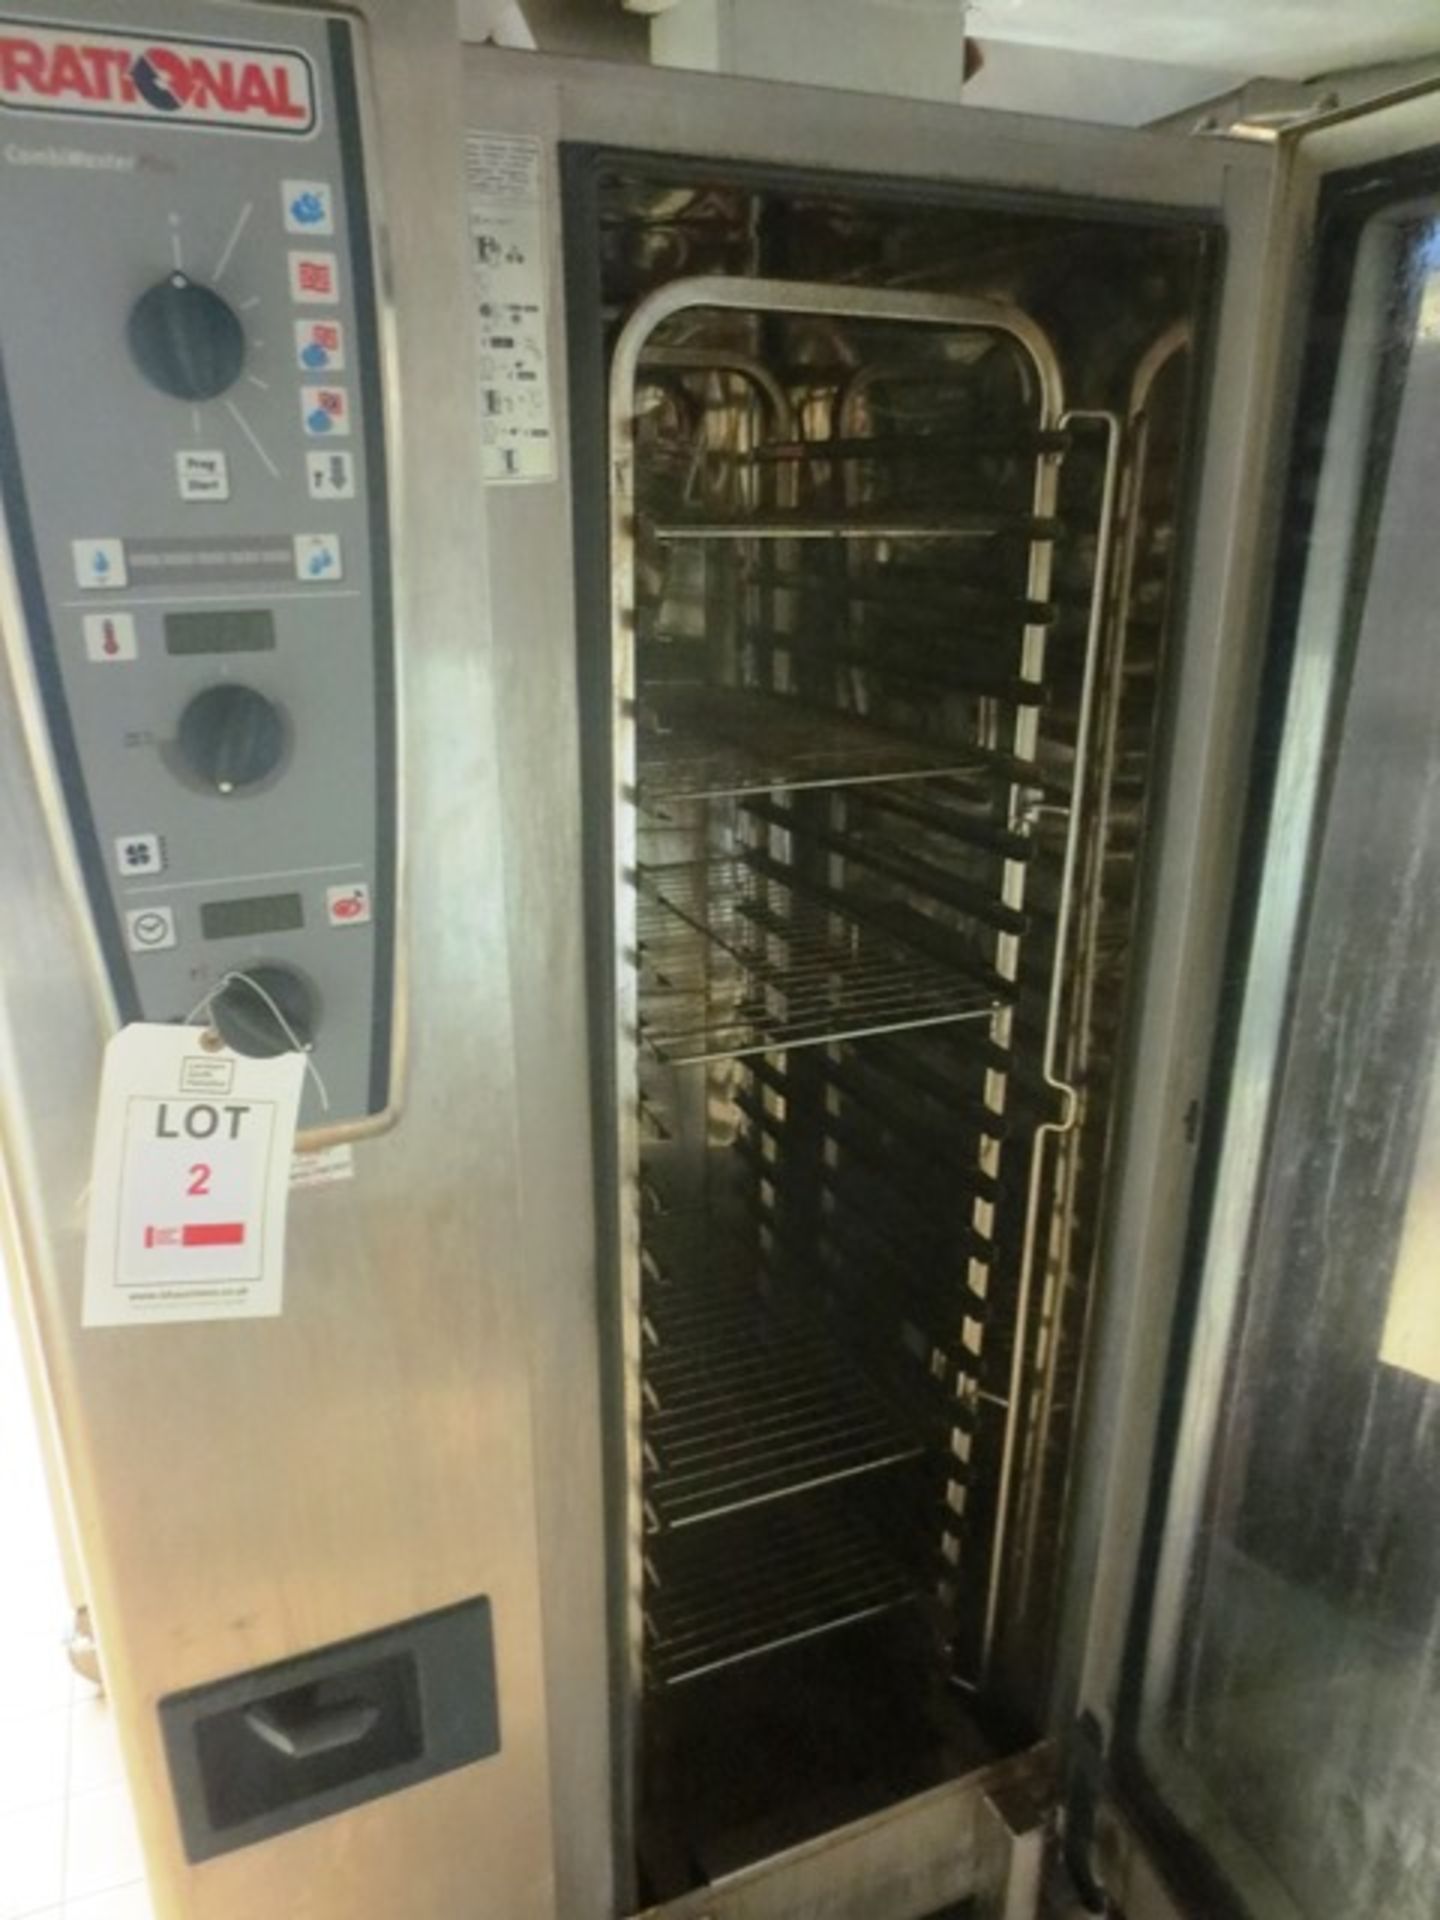 Rational Combi Master Plus, stainless steel combi oven, model: CMP201, serial no: - Image 4 of 4